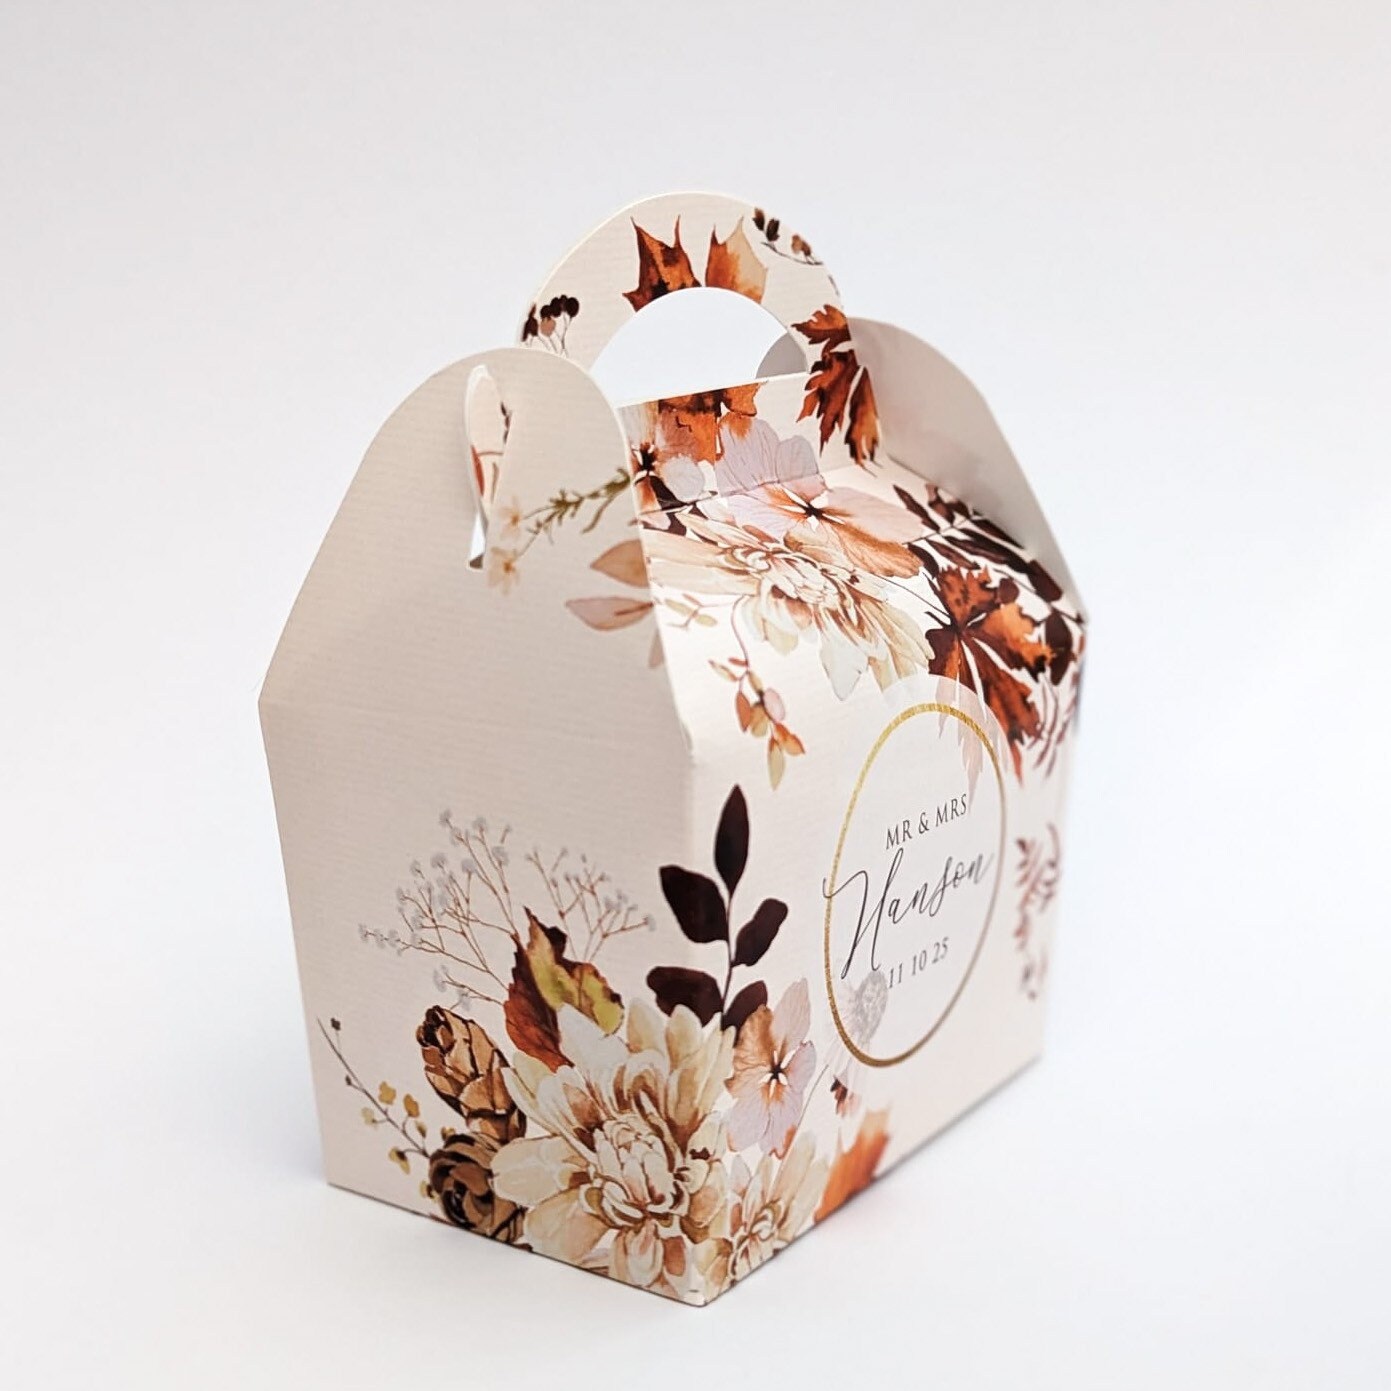 Autumn Fall Foliage Personalised Wedding Favour Boxes Hen Party Bridal Shower Gift Box